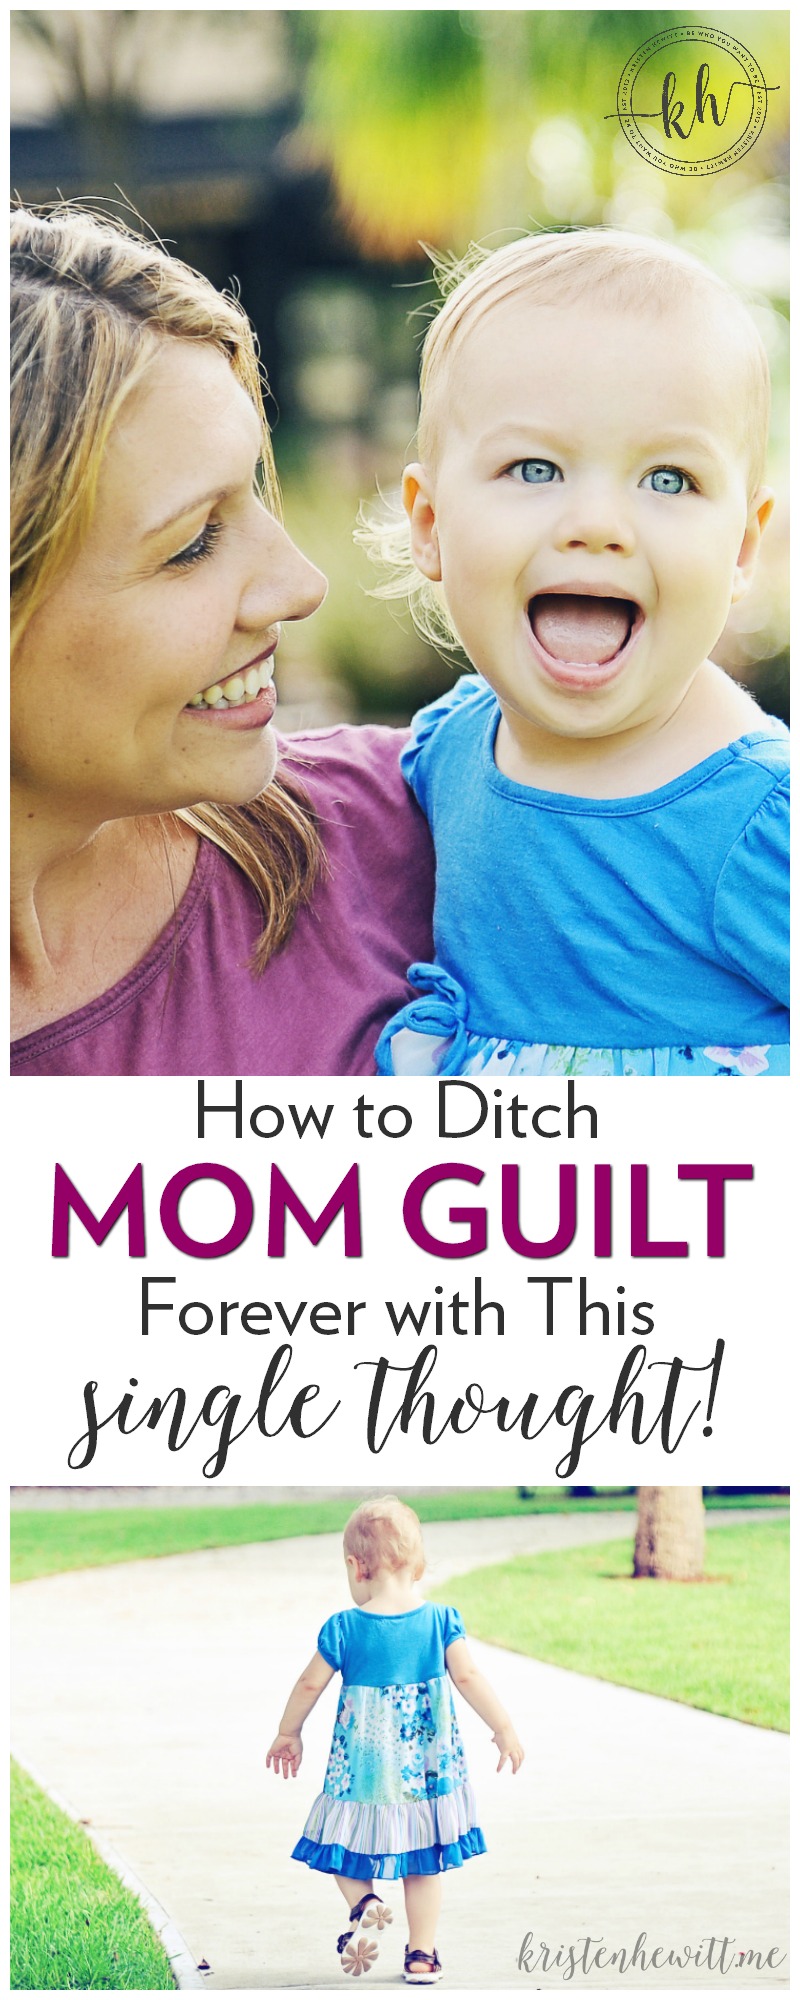 Do you experience mom guilt often? Never feeling like you are a doing a good enough job? Well try this one thought, and make mom guilt vanish forever!